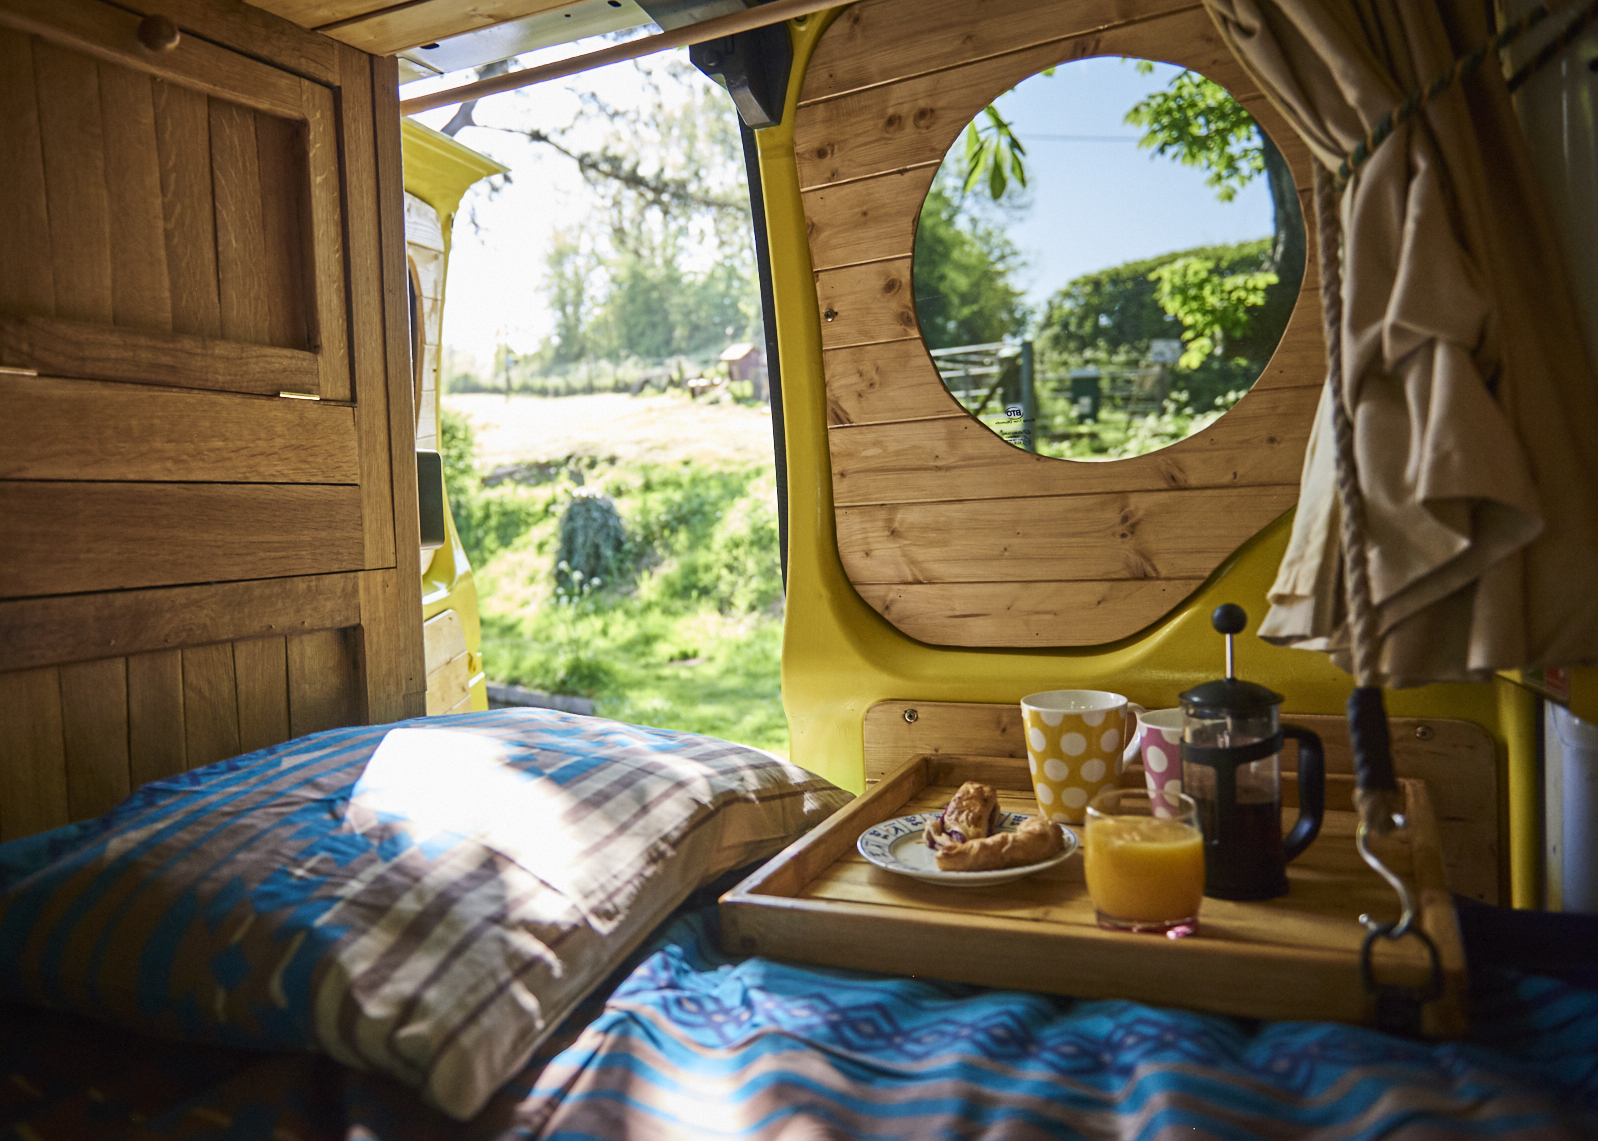 A cozy yellow campervan interior with wooden finishes. There's a bed draped with a blue blanket, and a tray on it that holds a French press, a glass of juice, and a polka-dotted mug. Through the large circular window, a sunny, green, grassy landscape with trees is visible.